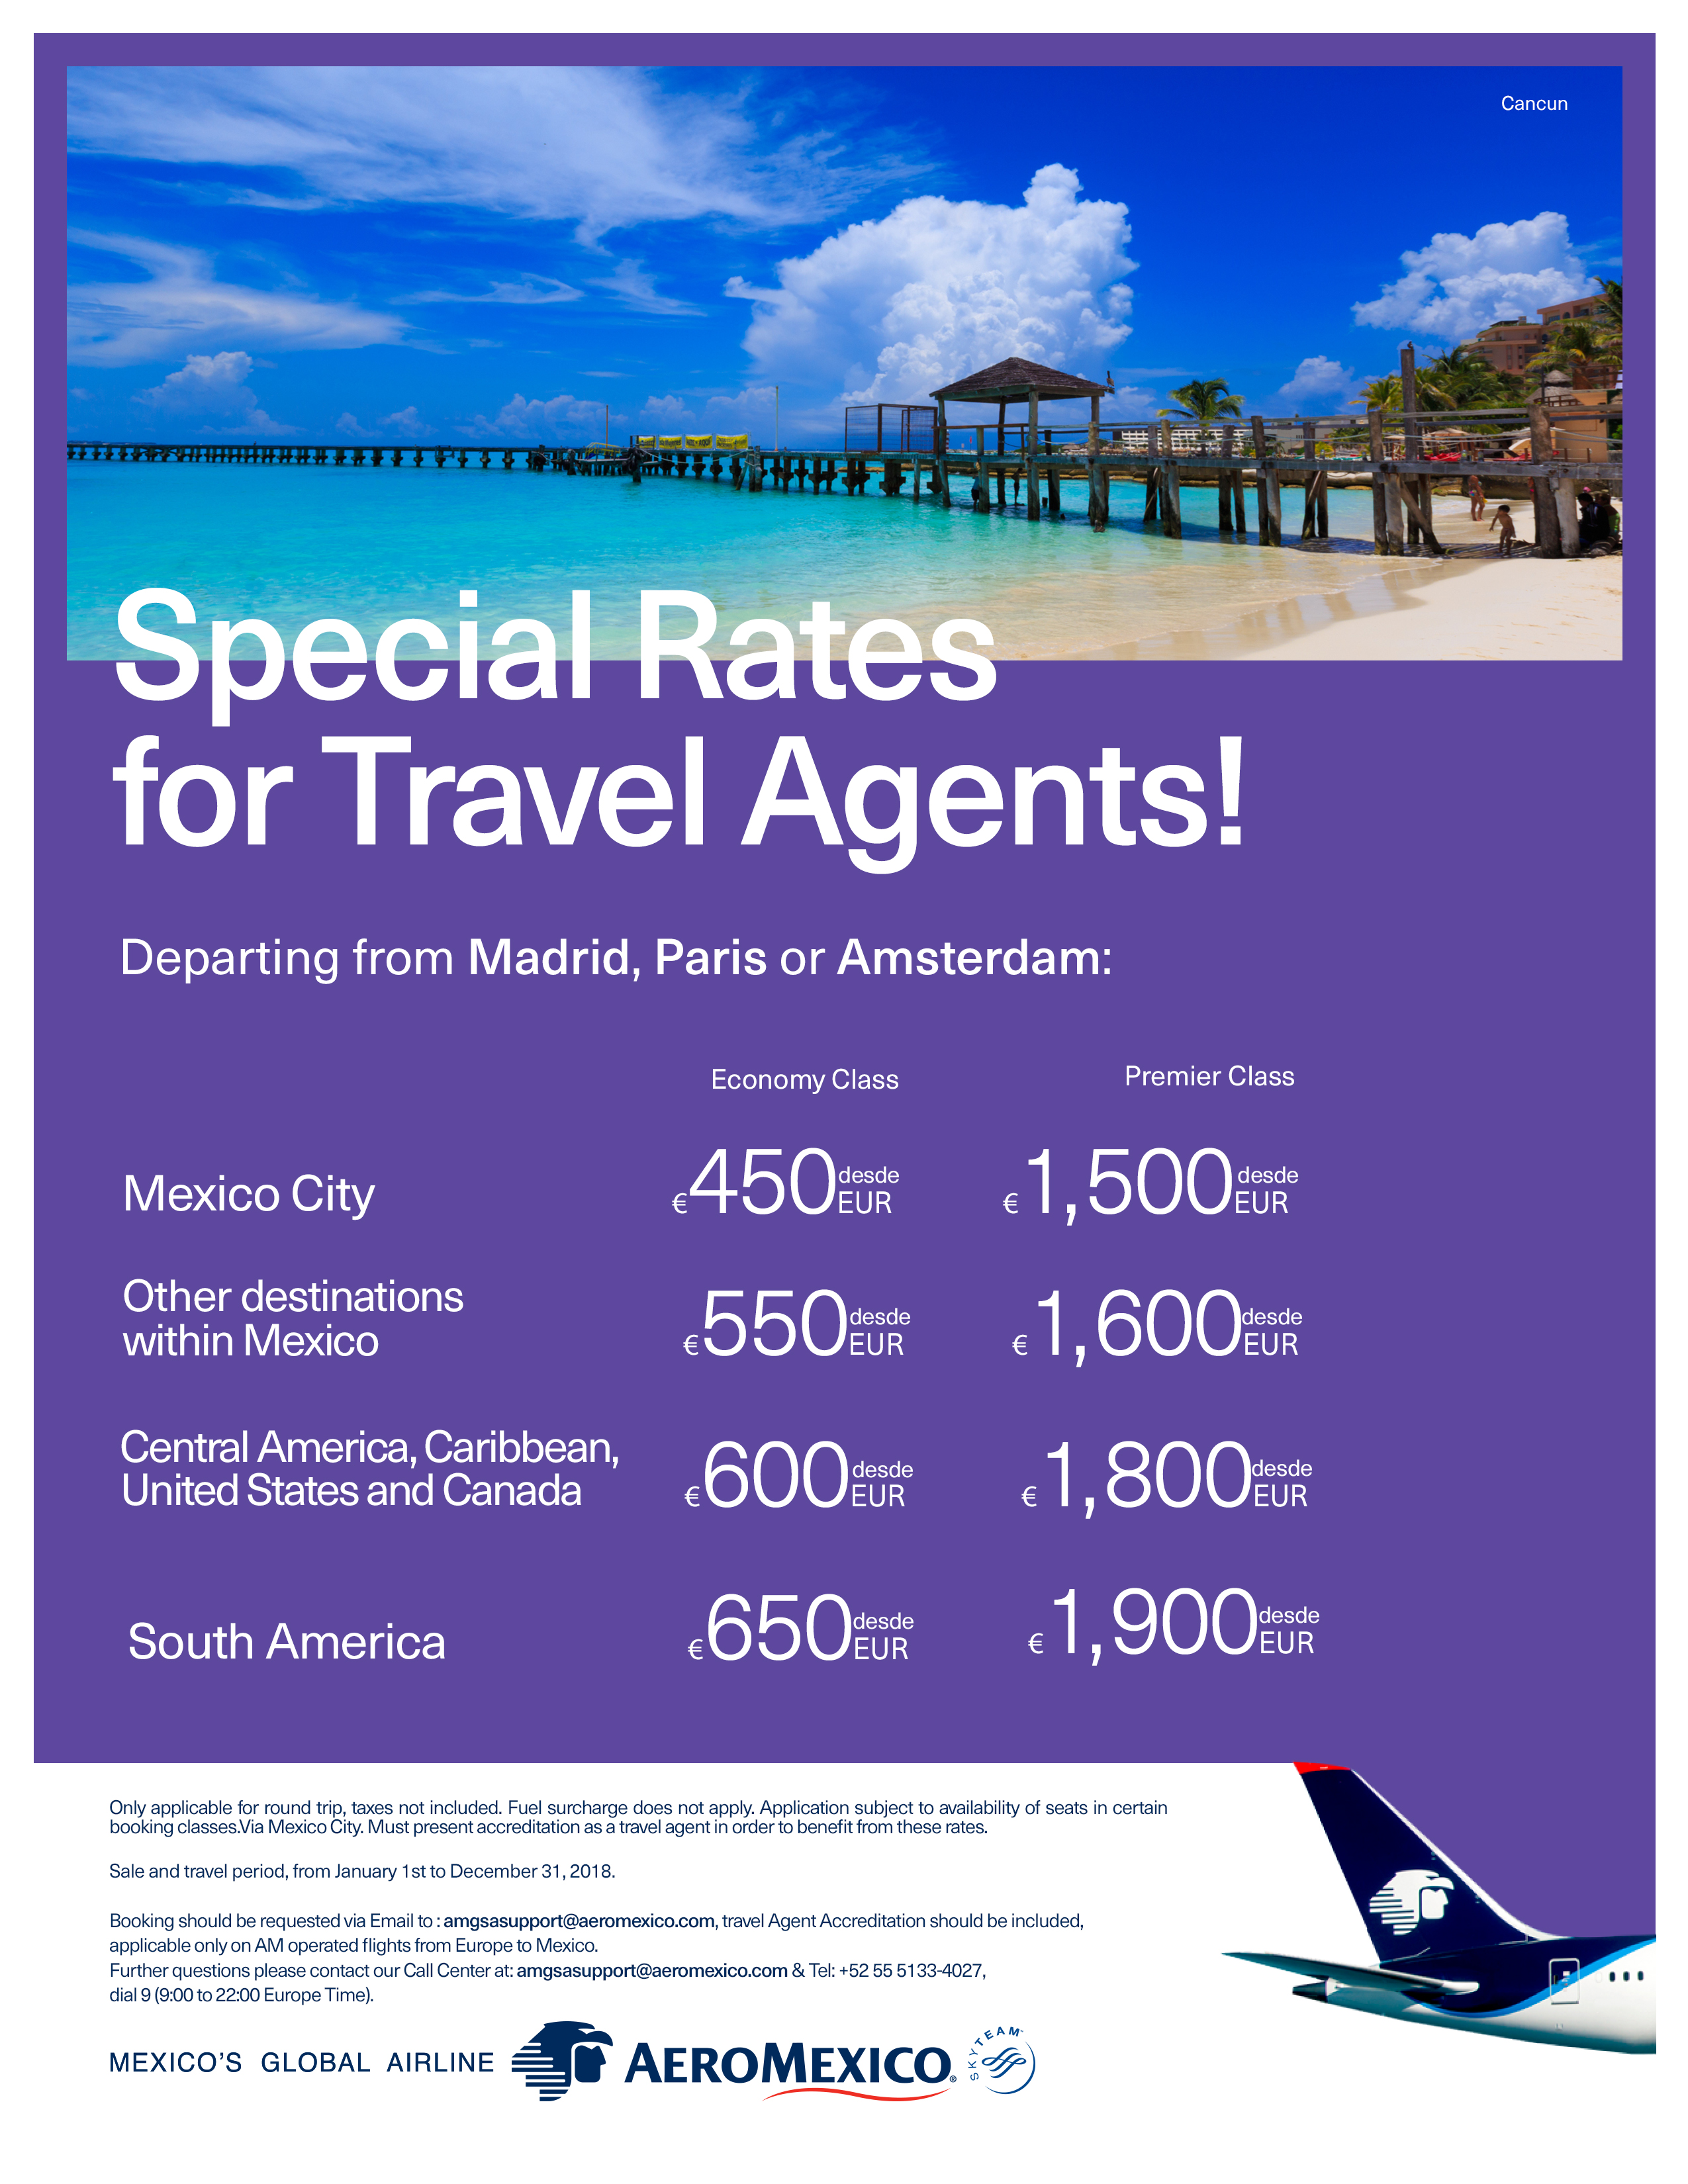 aeromexico travel agent support